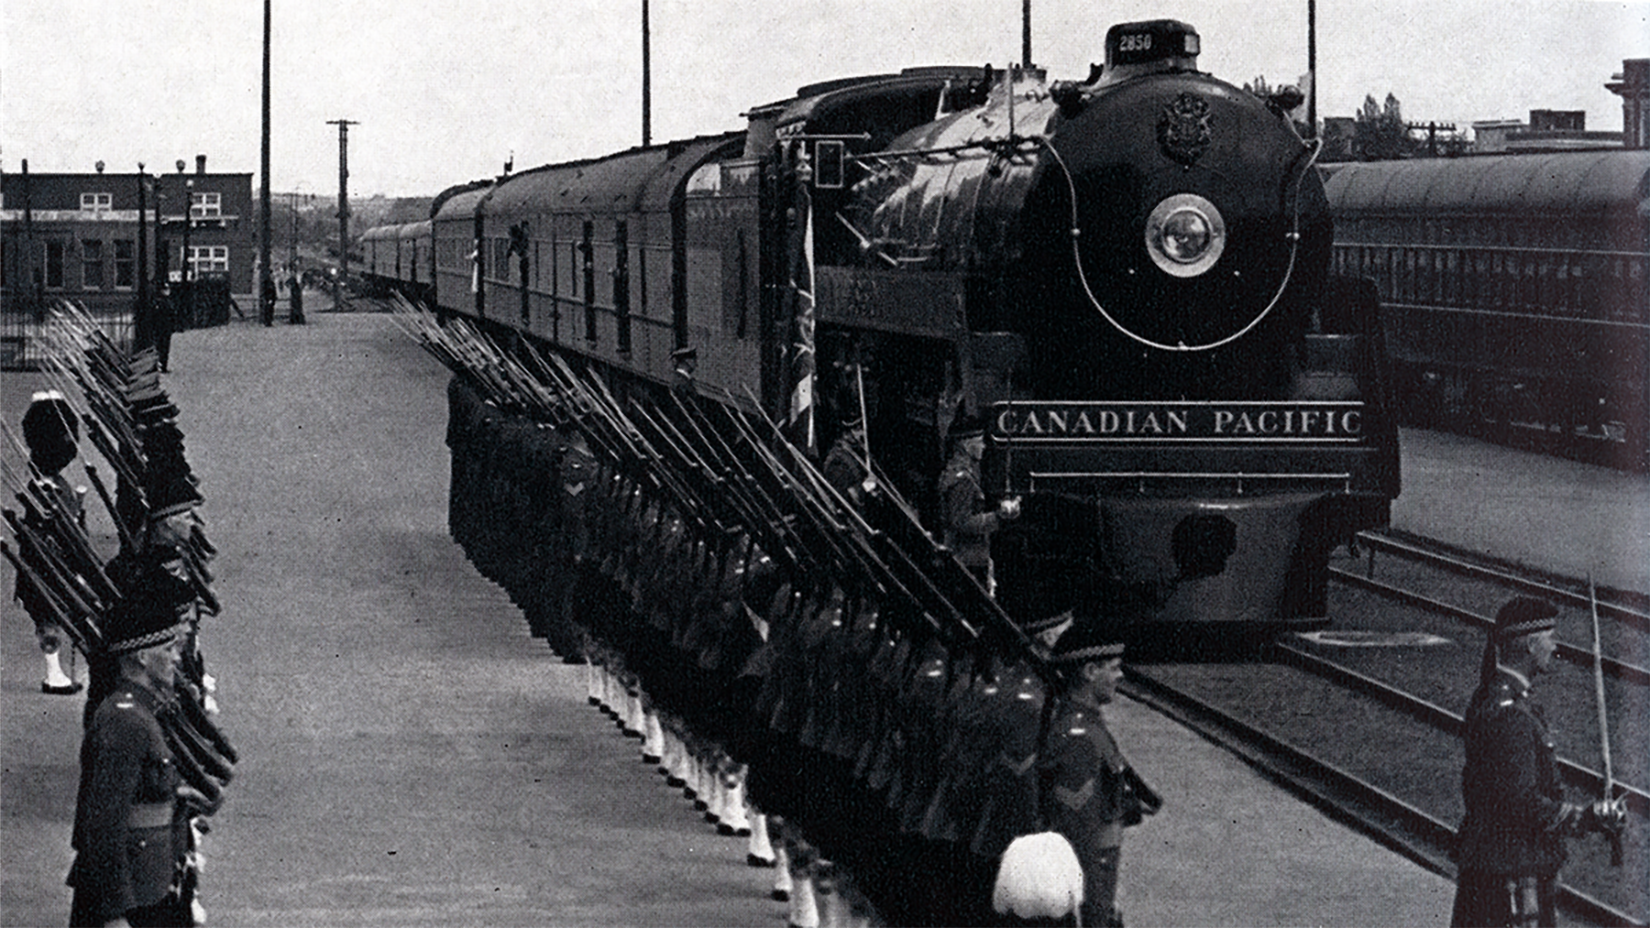 A black and white photo of a Canadian Pacific train.